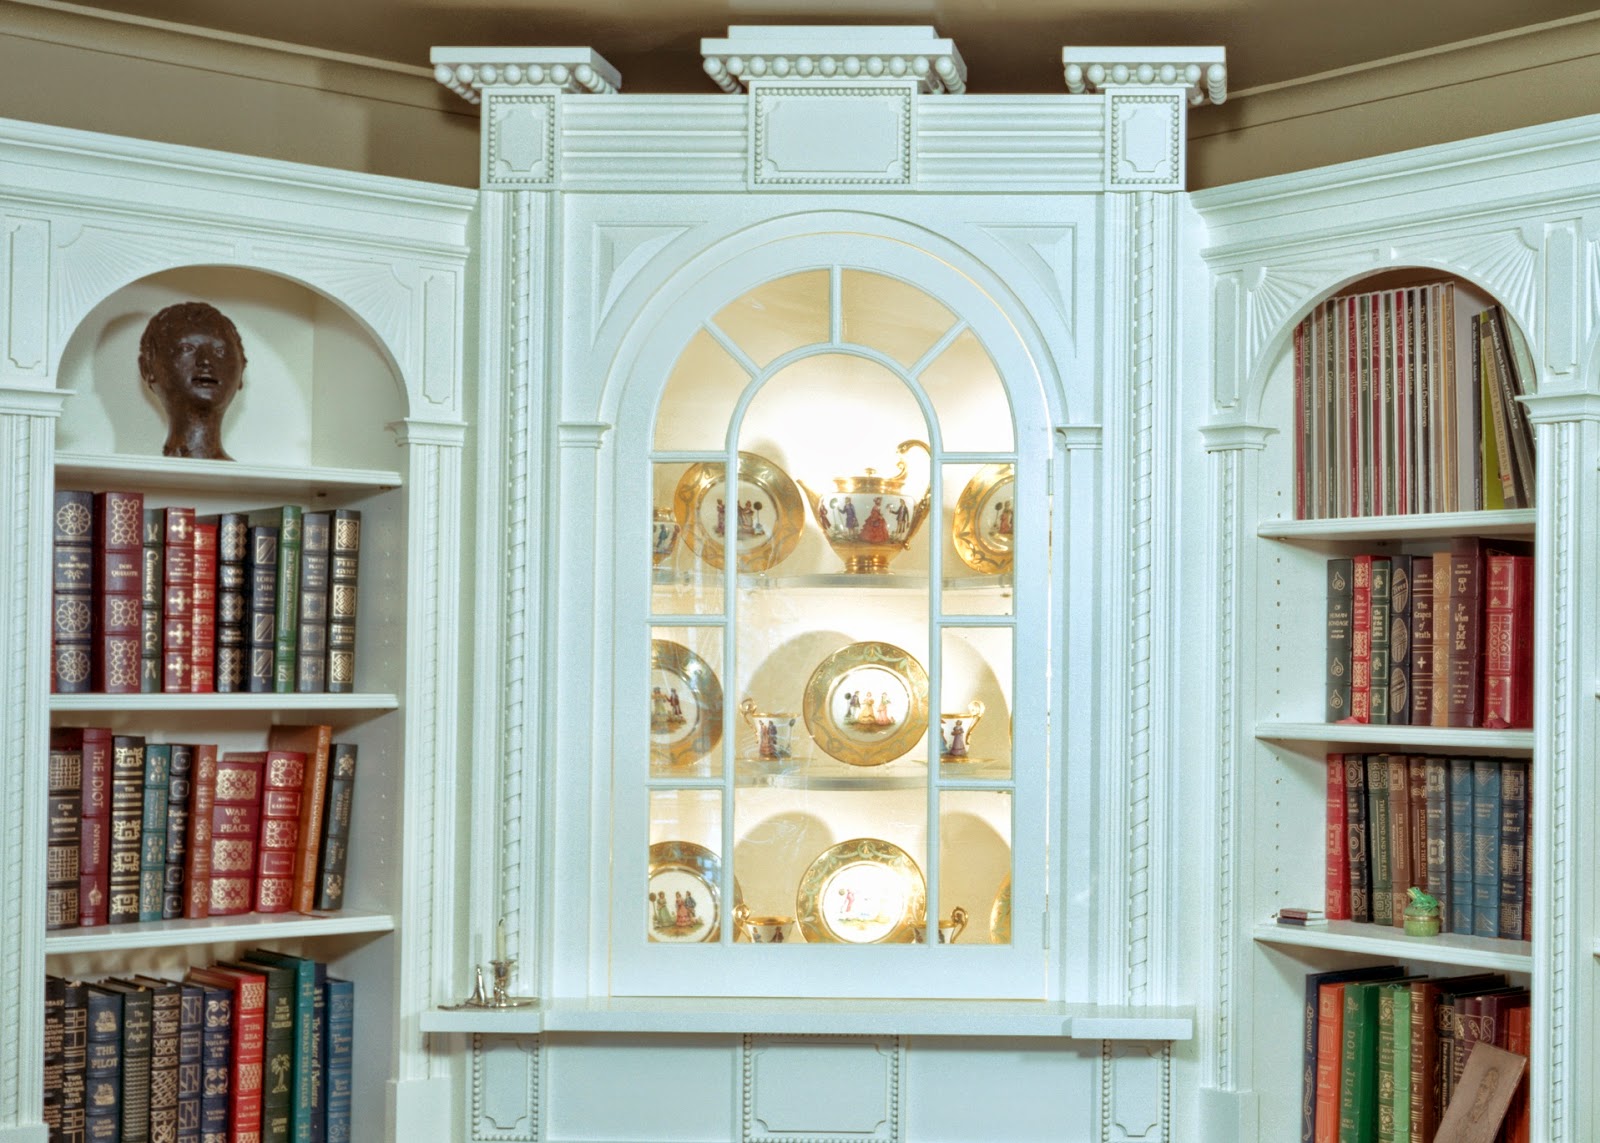 painted, white, library with fireplace and cabinetry, design styles and ideas for interior woodworking